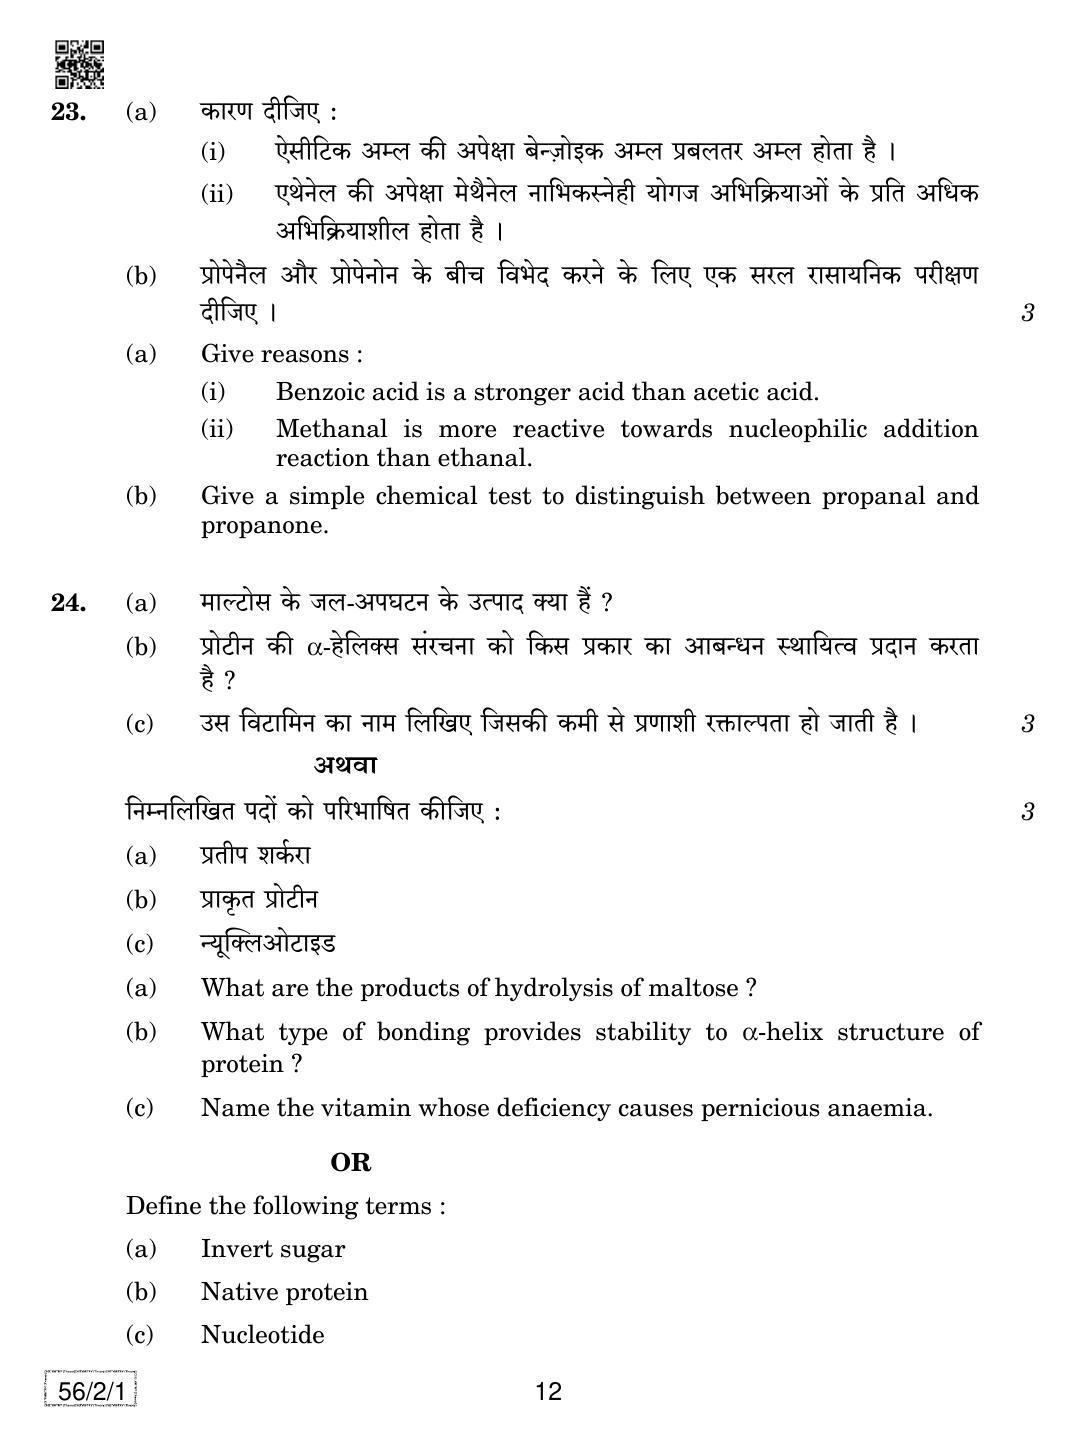 CBSE Class 12 56-2-1 Chemistry 2019 Question Paper - Page 12